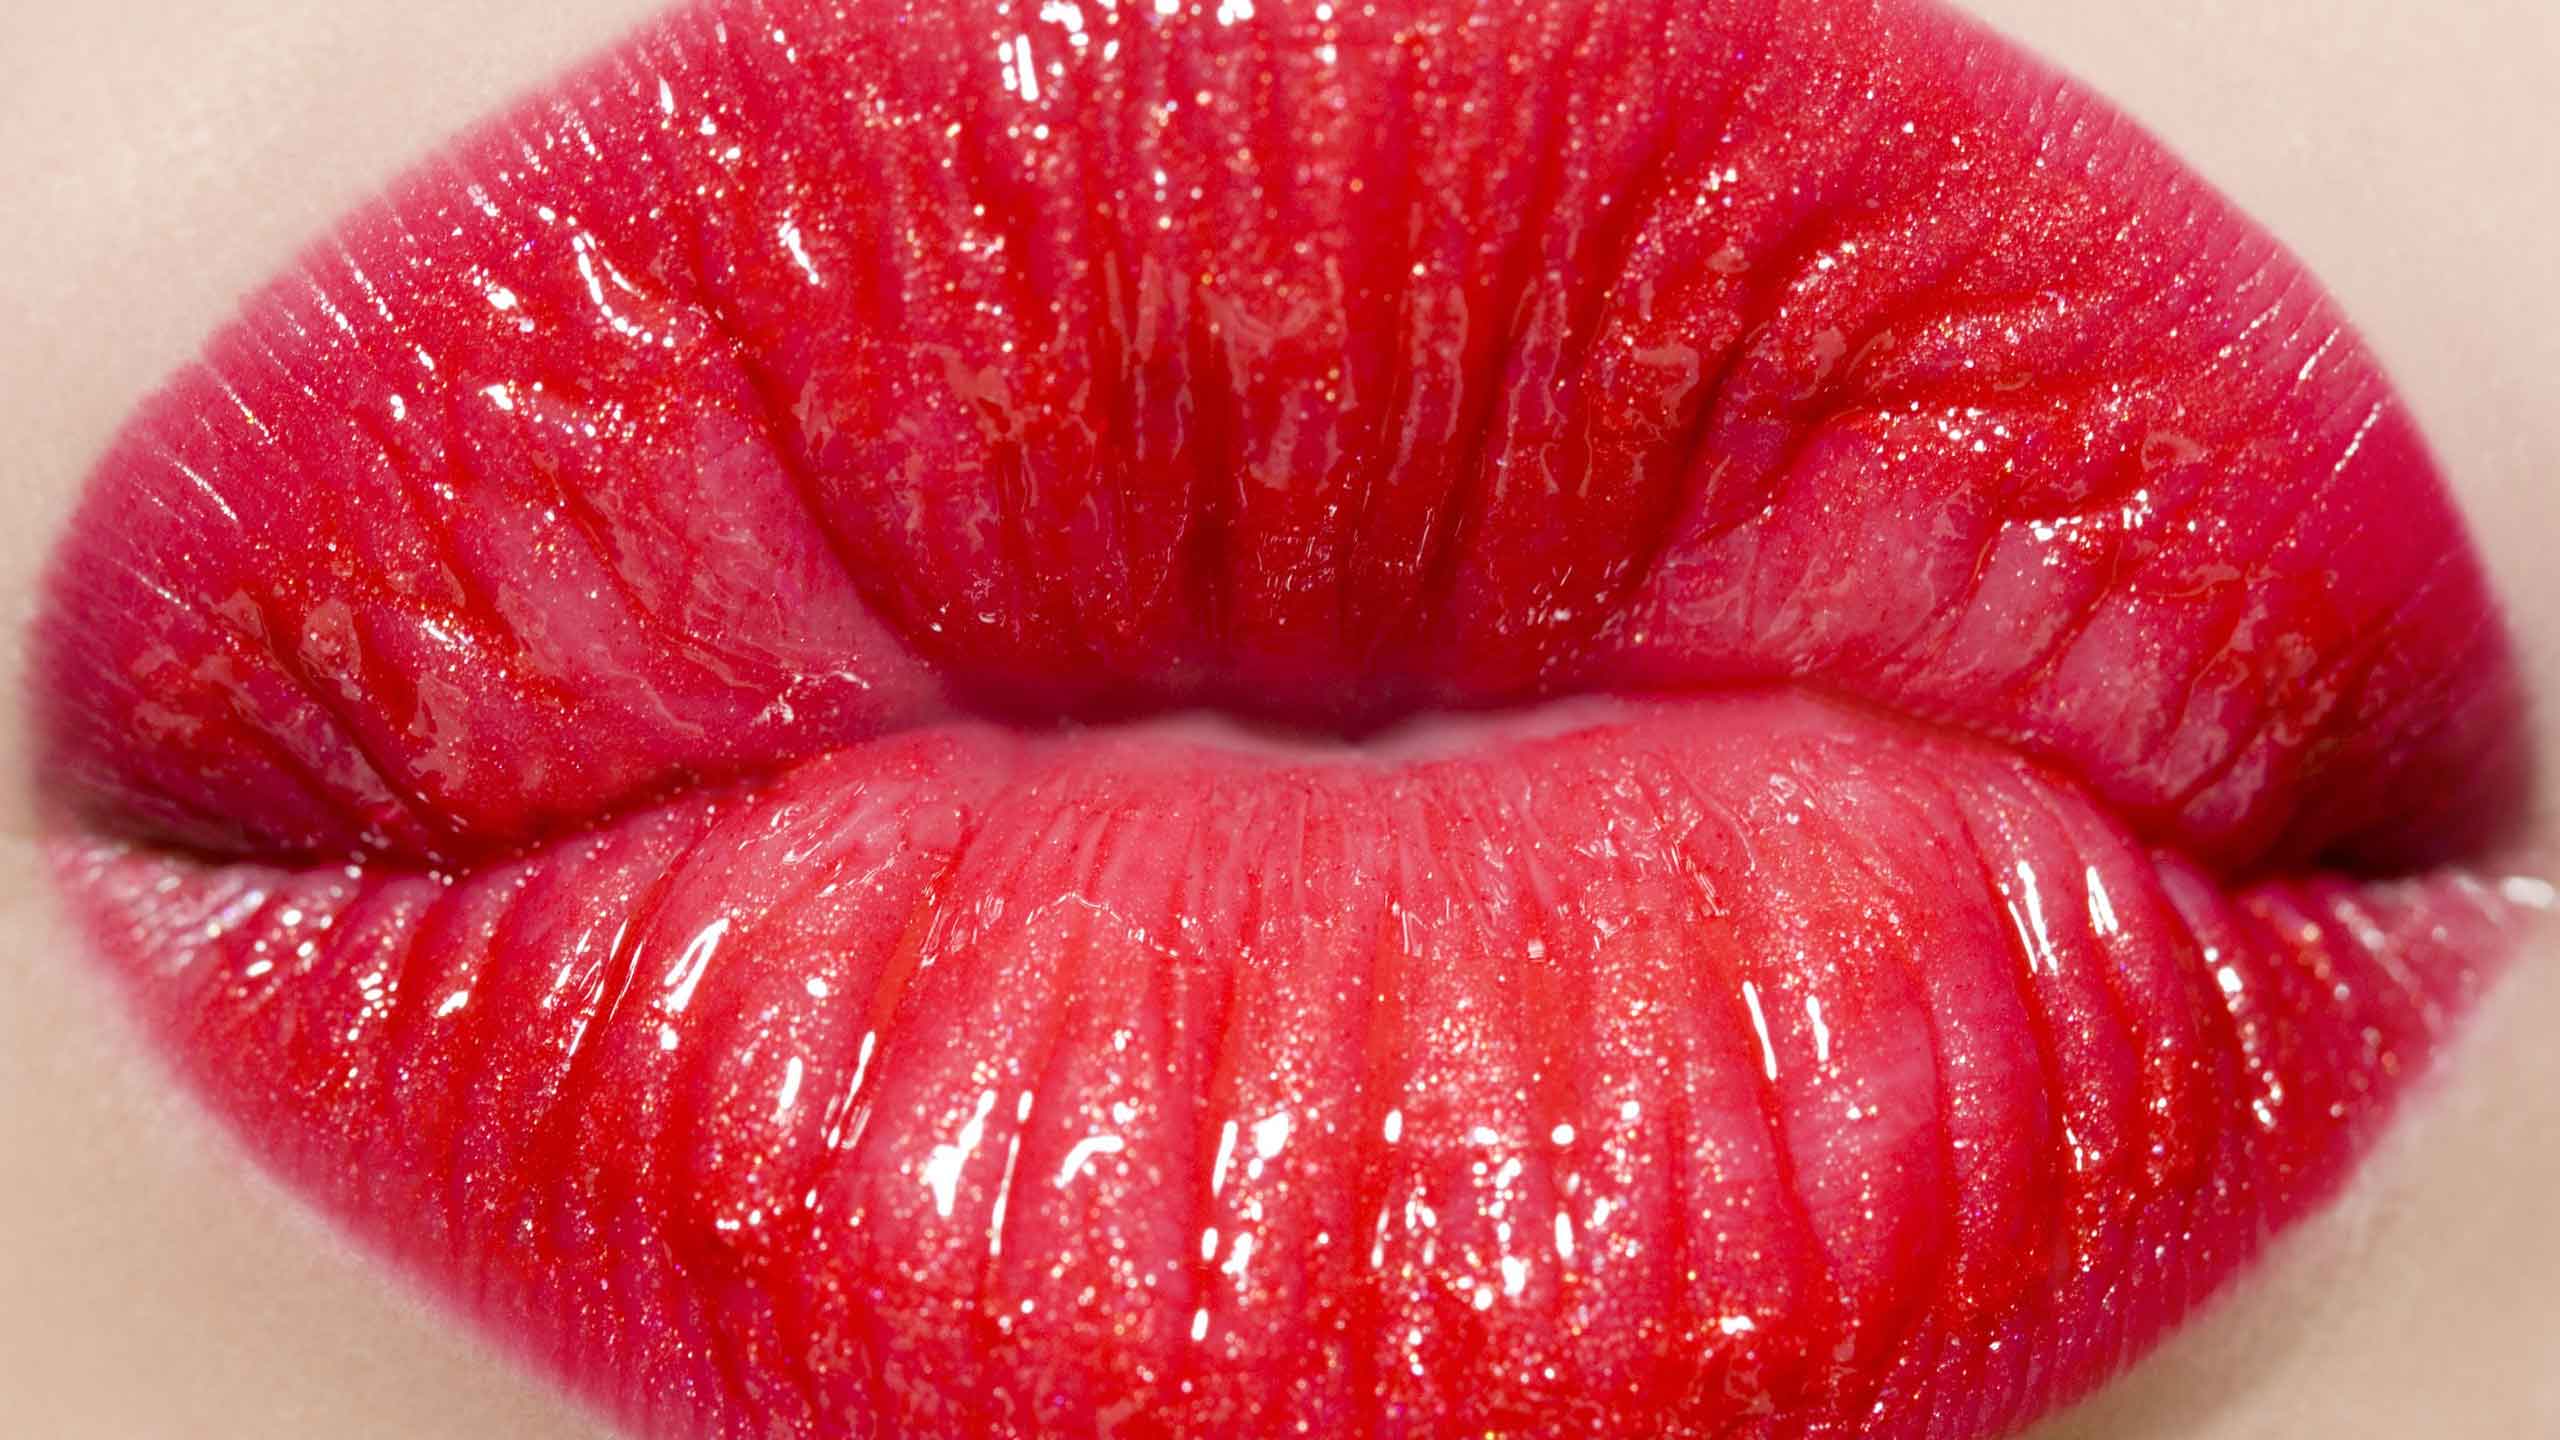 12 Types of Kisses That Will Have You Both Craving More.